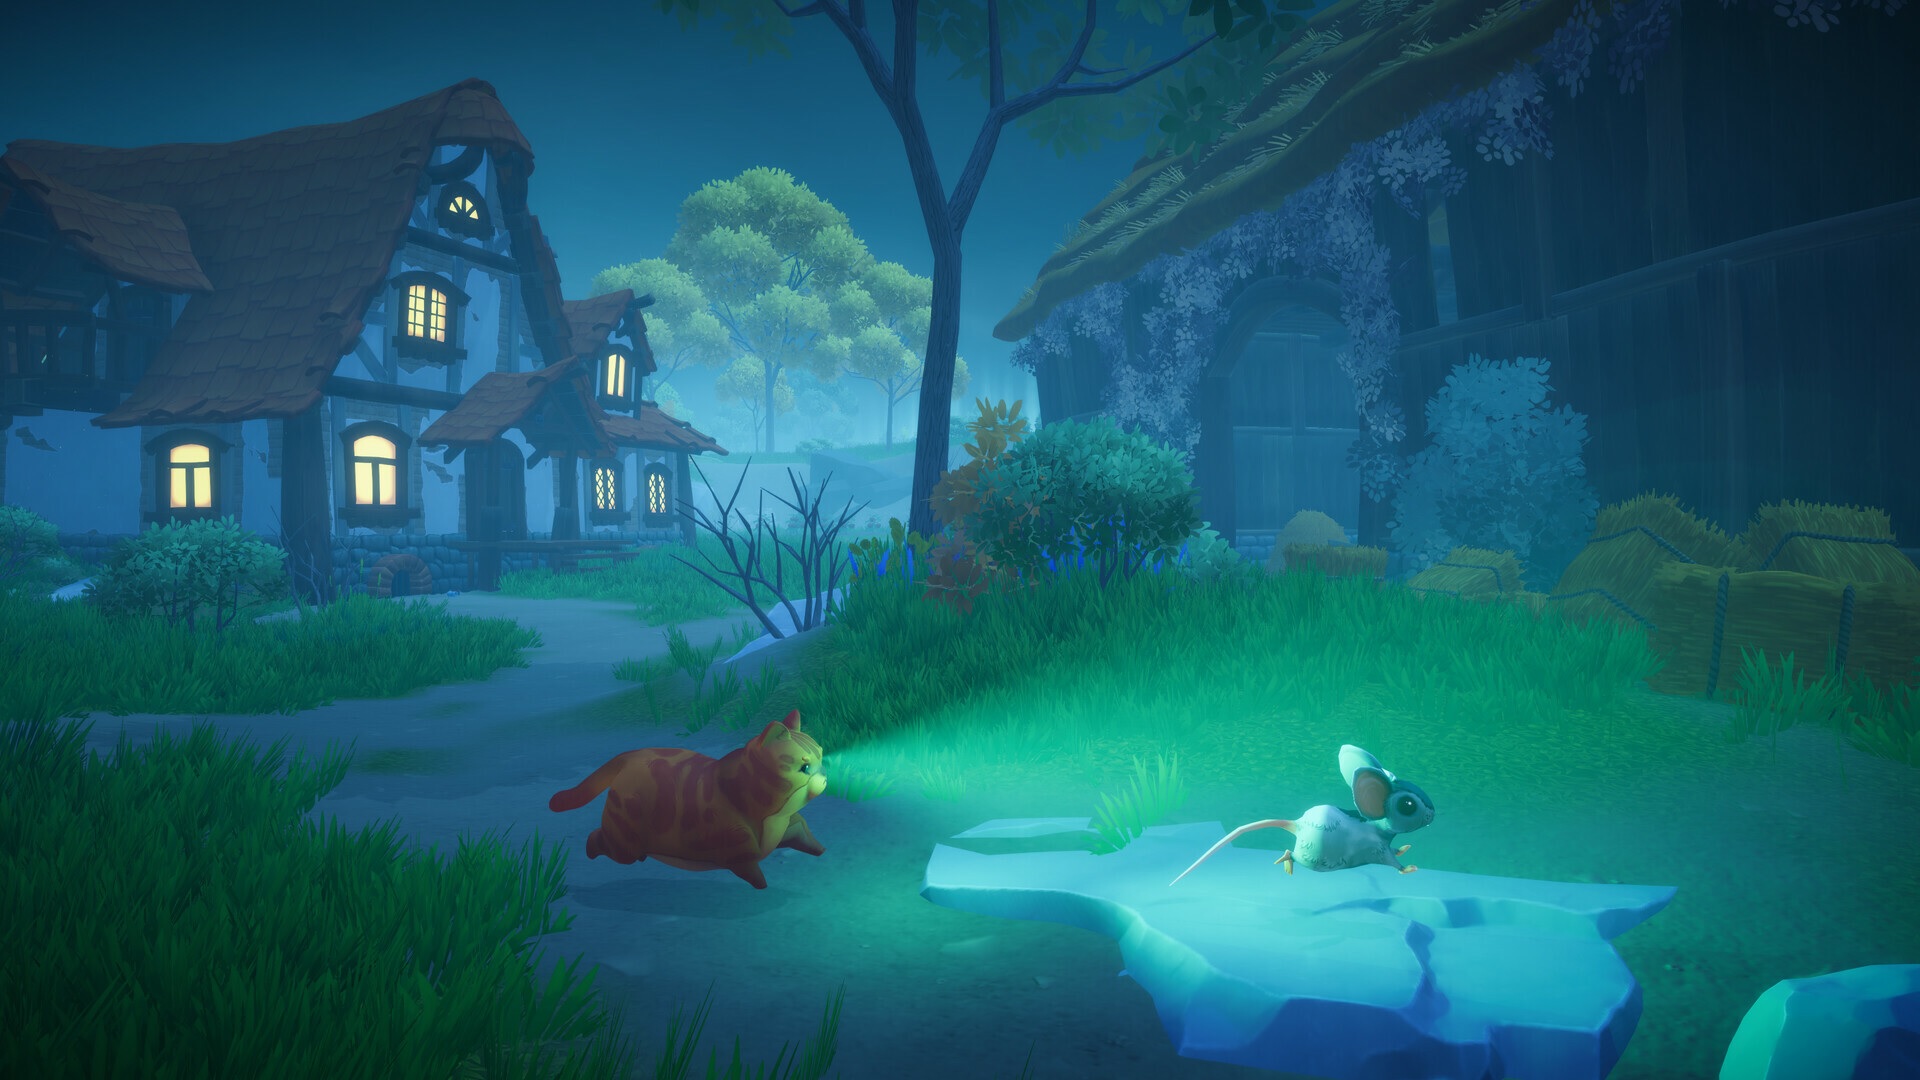 Everdream Valley - at  night an orange cat runs behind a mouse with its eyes shining.